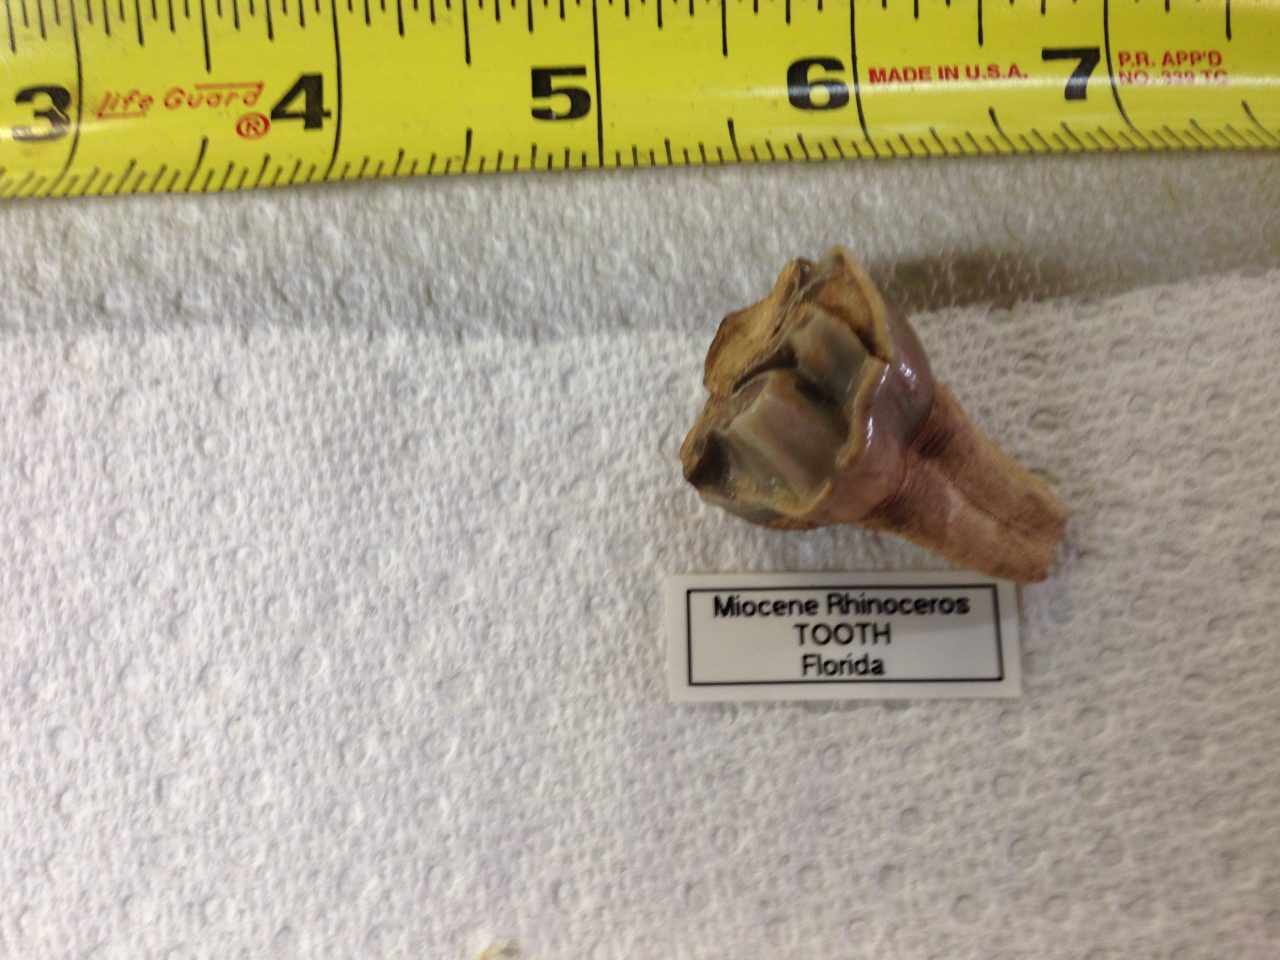 Rhinoceros Menoceras Barbouri Two Partial Teeth Fossil from Florida | Fossils & Artifacts for Sale | Paleo Enterprises | Fossils & Artifacts for Sale